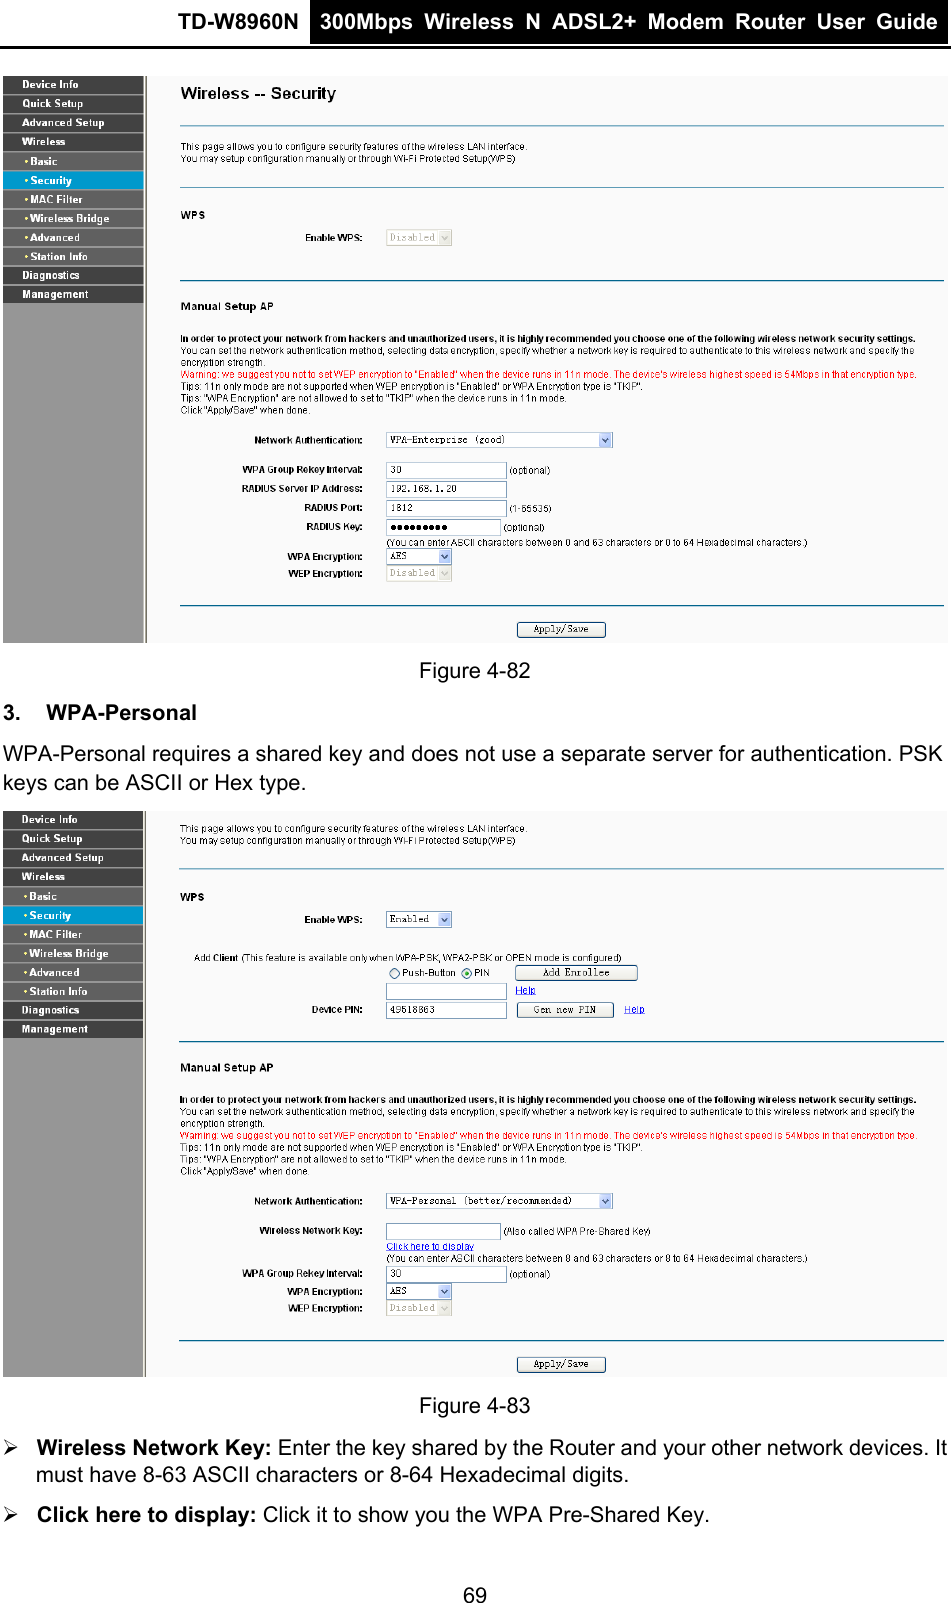 TD-W8960N  300Mbps Wireless N ADSL2+ Modem Router User Guide   Figure 4-82 3. WPA-Personal WPA-Personal requires a shared key and does not use a separate server for authentication. PSK keys can be ASCII or Hex type.  Figure 4-83  Wireless Network Key: Enter the key shared by the Router and your other network devices. It must have 8-63 ASCII characters or 8-64 Hexadecimal digits.  Click here to display: Click it to show you the WPA Pre-Shared Key. 69 